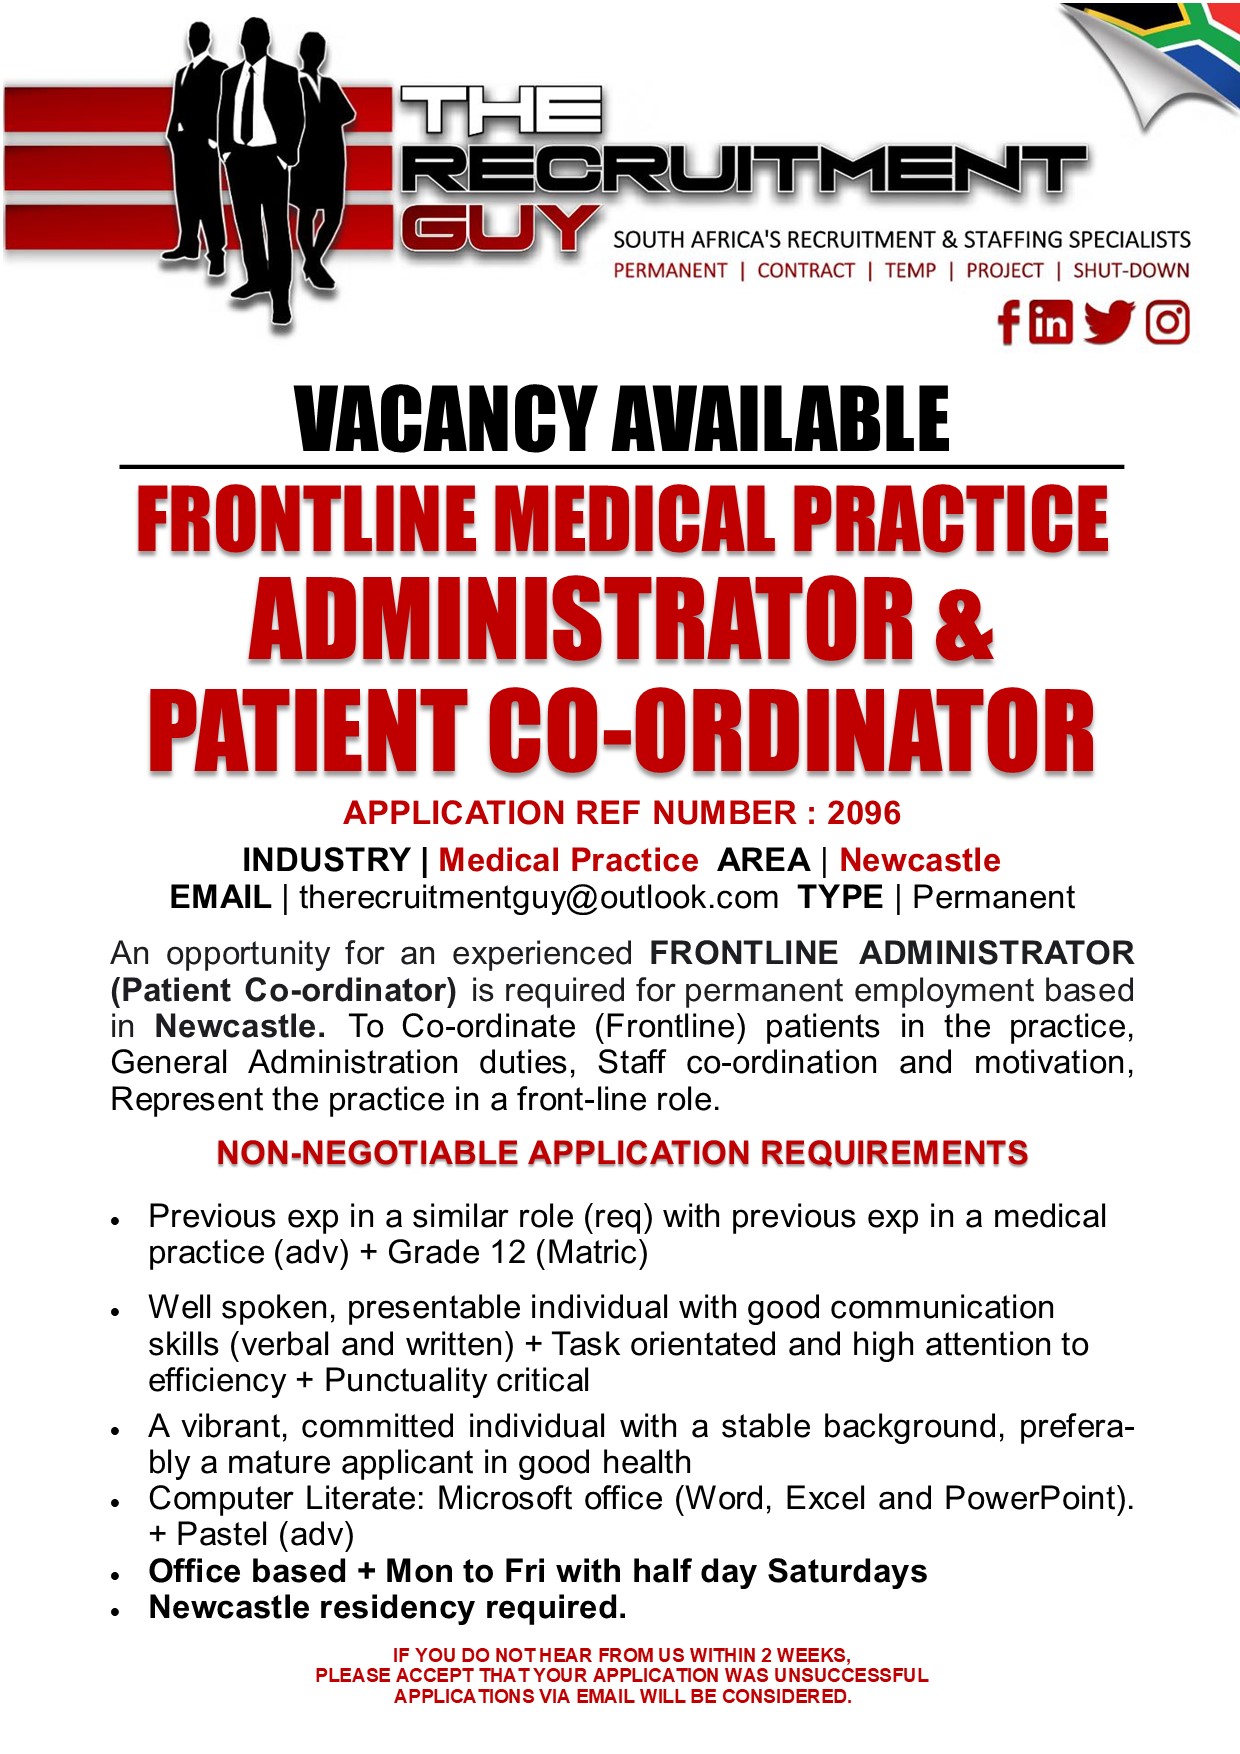 GUY SOUTH AFRICA'S RECRUITMENT & STAFFING SPECIALISTS

PERMANENT | CONTRACT | TEMP | PROJECT | SHUT-DOWN

fBYE
VACANCY AVAILABLE
FRONTLINE MEDICAL PRACTICE

ADMINISTRATOR &
PATIENT CO-ORDINATOR

APPLICATION REF NUMBER : 2096

INDUSTRY | Medical Practice AREA | Newcastle
EMAIL | therecruitmentguy@outlook.com TYPE | Permanent

An opportunity for an experienced FRONTLINE ADMINISTRATOR
(Patient Co-ordinator) is required for permanent employment based
in Newcastle. To Co-ordinate (Frontline) patients in the practice,
General Administration duties, Staff co-ordination and motivation,
Represent the practice in a front-line role.

NON-NEGOTIABLE APPLICATION REQUIREMENTS

 

+ Previous exp in a similar role (req) with previous exp in a medical
practice (adv) + Grade 12 (Matric)

+ Well spoken, presentable individual with good communication
skills (verbal and written) + Task orientated and high attention to
efficiency + Punctuality critical

« A vibrant, committed individual with a stable background, prefera-
bly a mature applicant in good health
« Computer Literate: Microsoft office (Word, Excel and PowerPoint).
+ Pastel (adv)
. Office based + Mon to Fri with half day Saturdays
. Newcastle residency required.
IF YOU DO NOT HEAR FROM US WITHIN 2 WEEKS,

PLEASE ACCEPT THAT YOUR APPLICATION WAS UNSUCCESSFUL
APPLICATIONS VIA EMAIL WILL BE CONSIDERED.